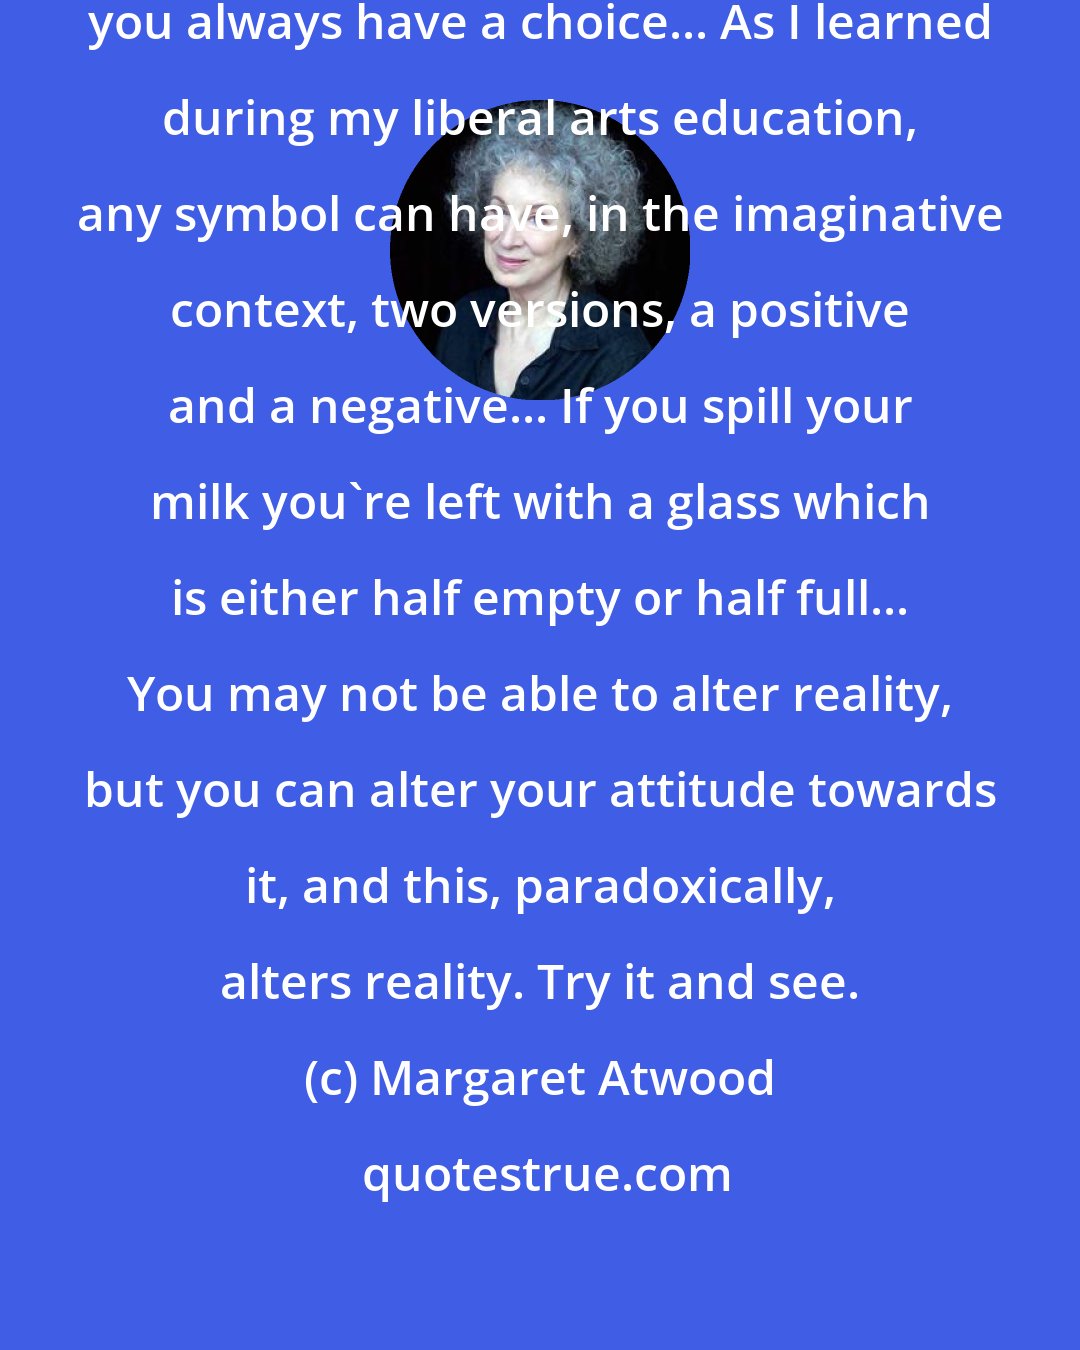 Margaret Atwood: When faced with the inevitable, you always have a choice... As I learned during my liberal arts education, any symbol can have, in the imaginative context, two versions, a positive and a negative... If you spill your milk you're left with a glass which is either half empty or half full... You may not be able to alter reality, but you can alter your attitude towards it, and this, paradoxically, alters reality. Try it and see.